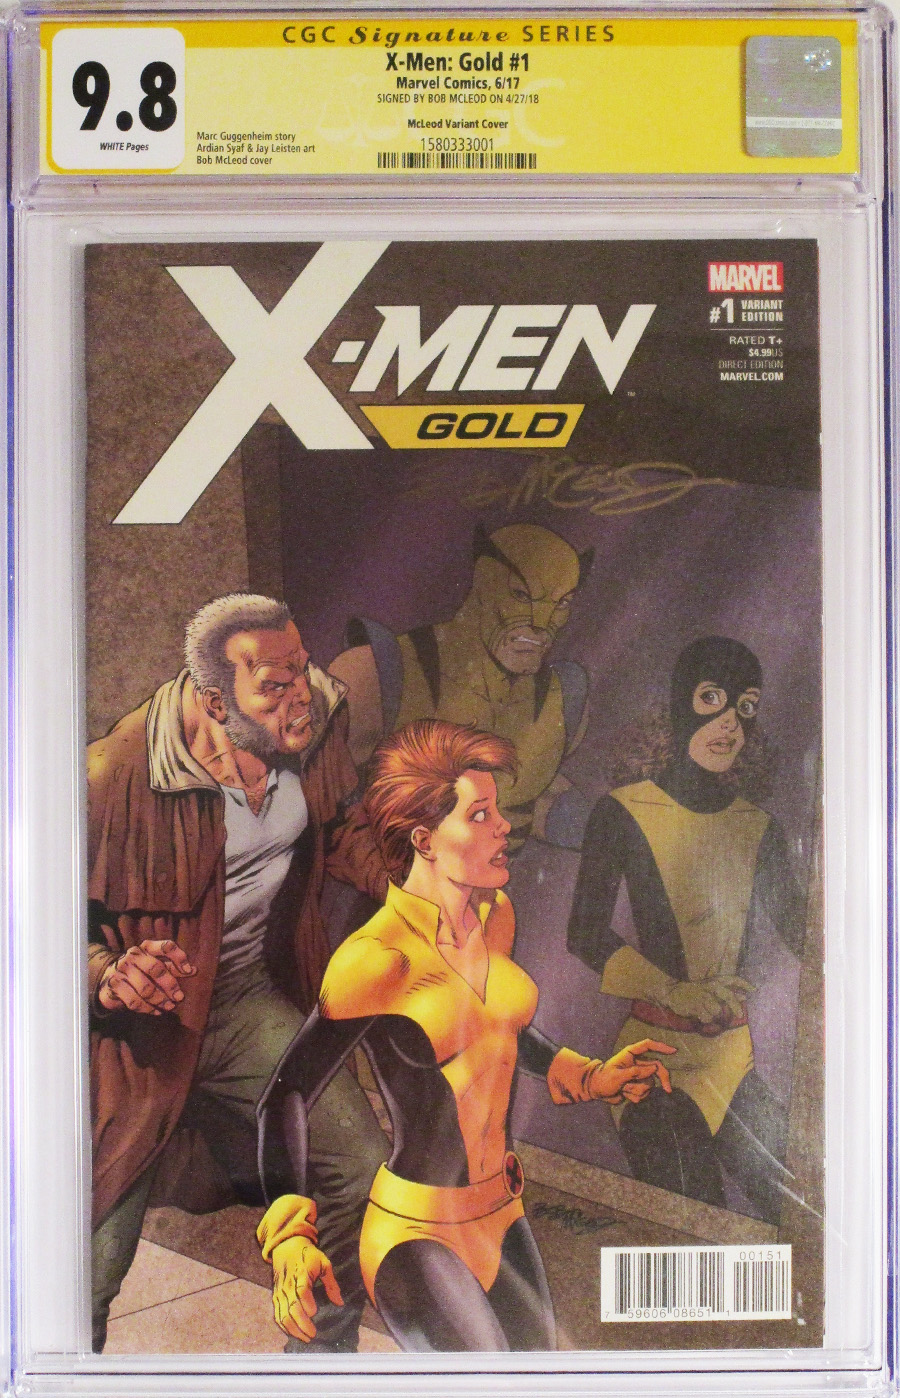 X-Men Gold #1 Cover N Incentive Bob McLeod Variant Cover (Resurrxion Tie-In) CGc Signature Series 9.8 Signed by Bob McLeod